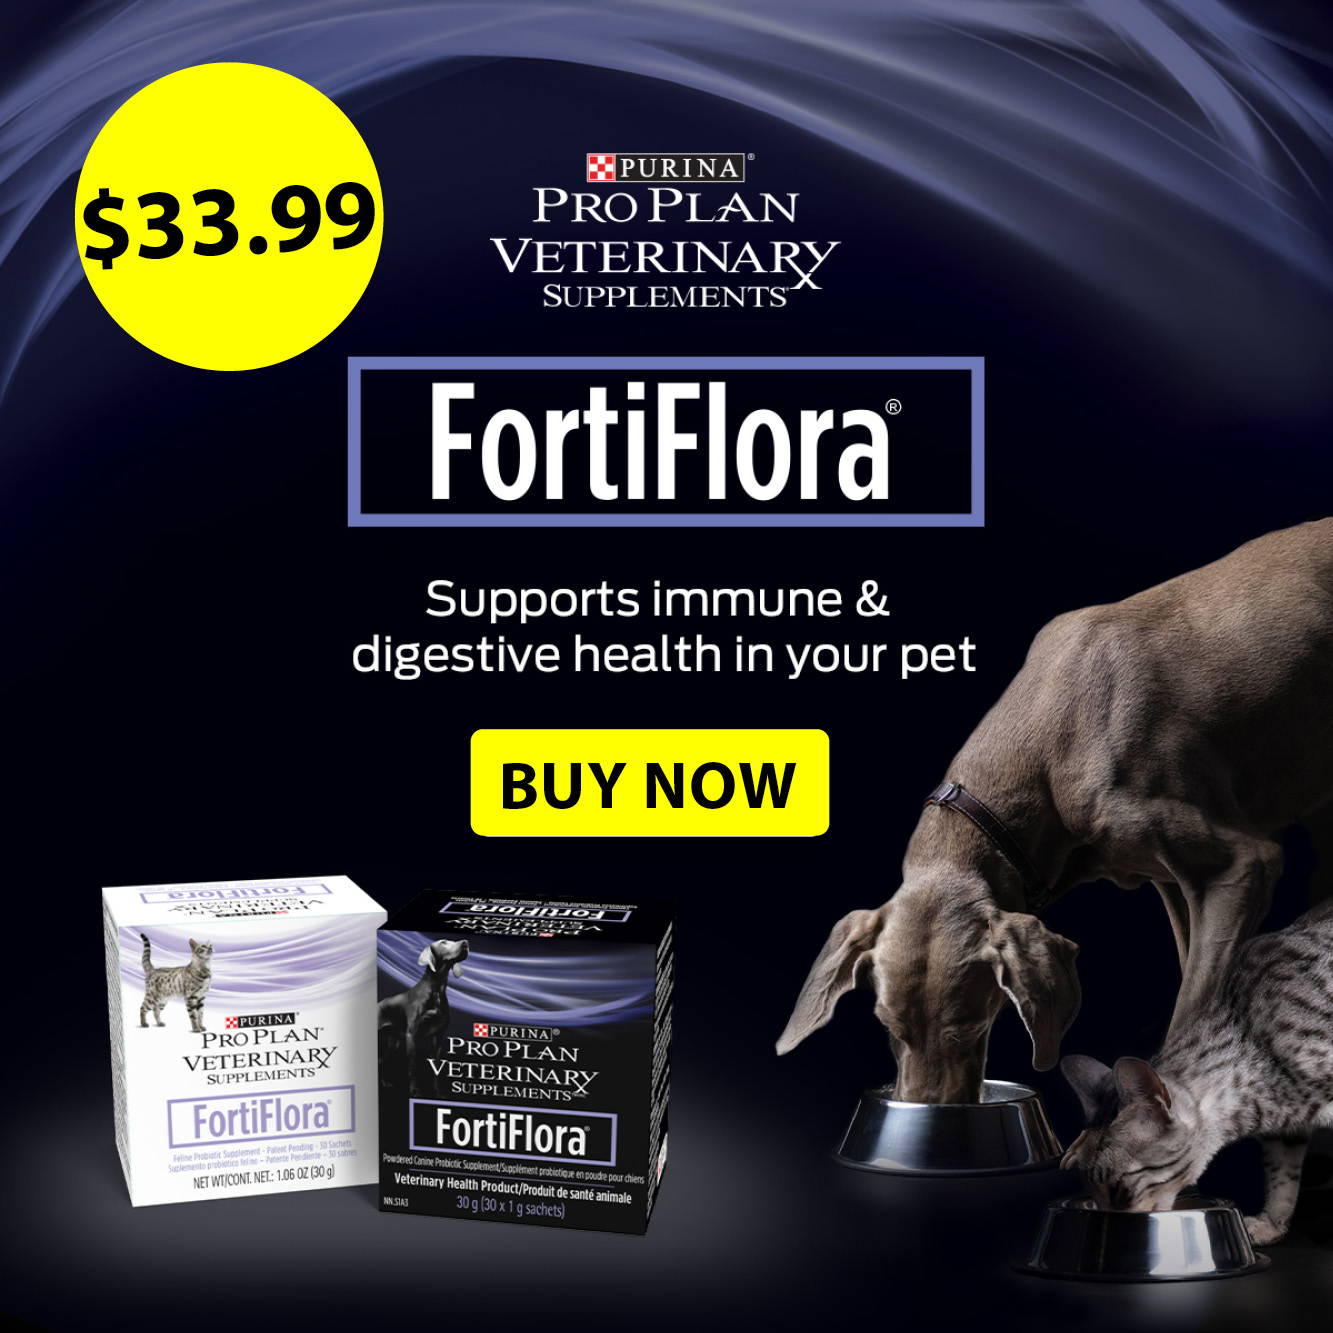 $33.99 Purina Pro Plan FortiFlora for dogs and cats